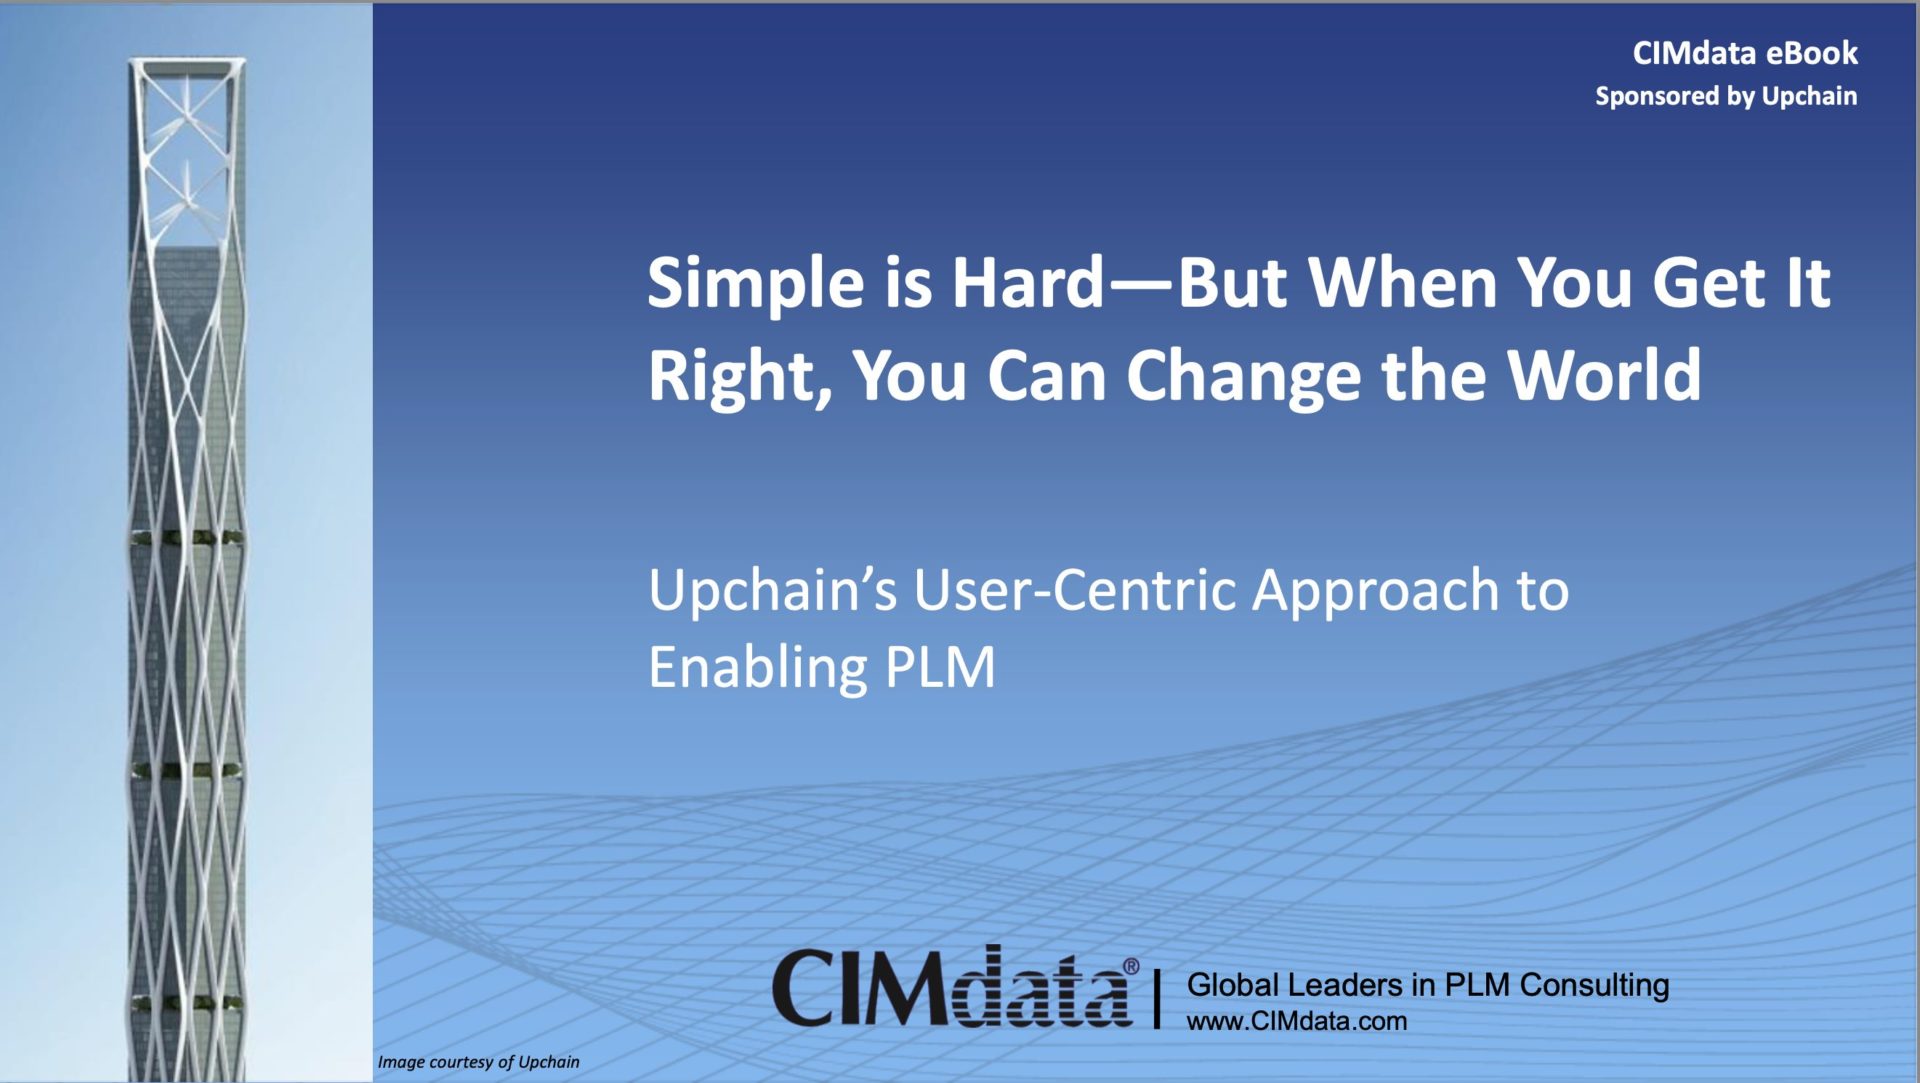 Simple is hard: Upchain's user-centric approach to cloud PLM